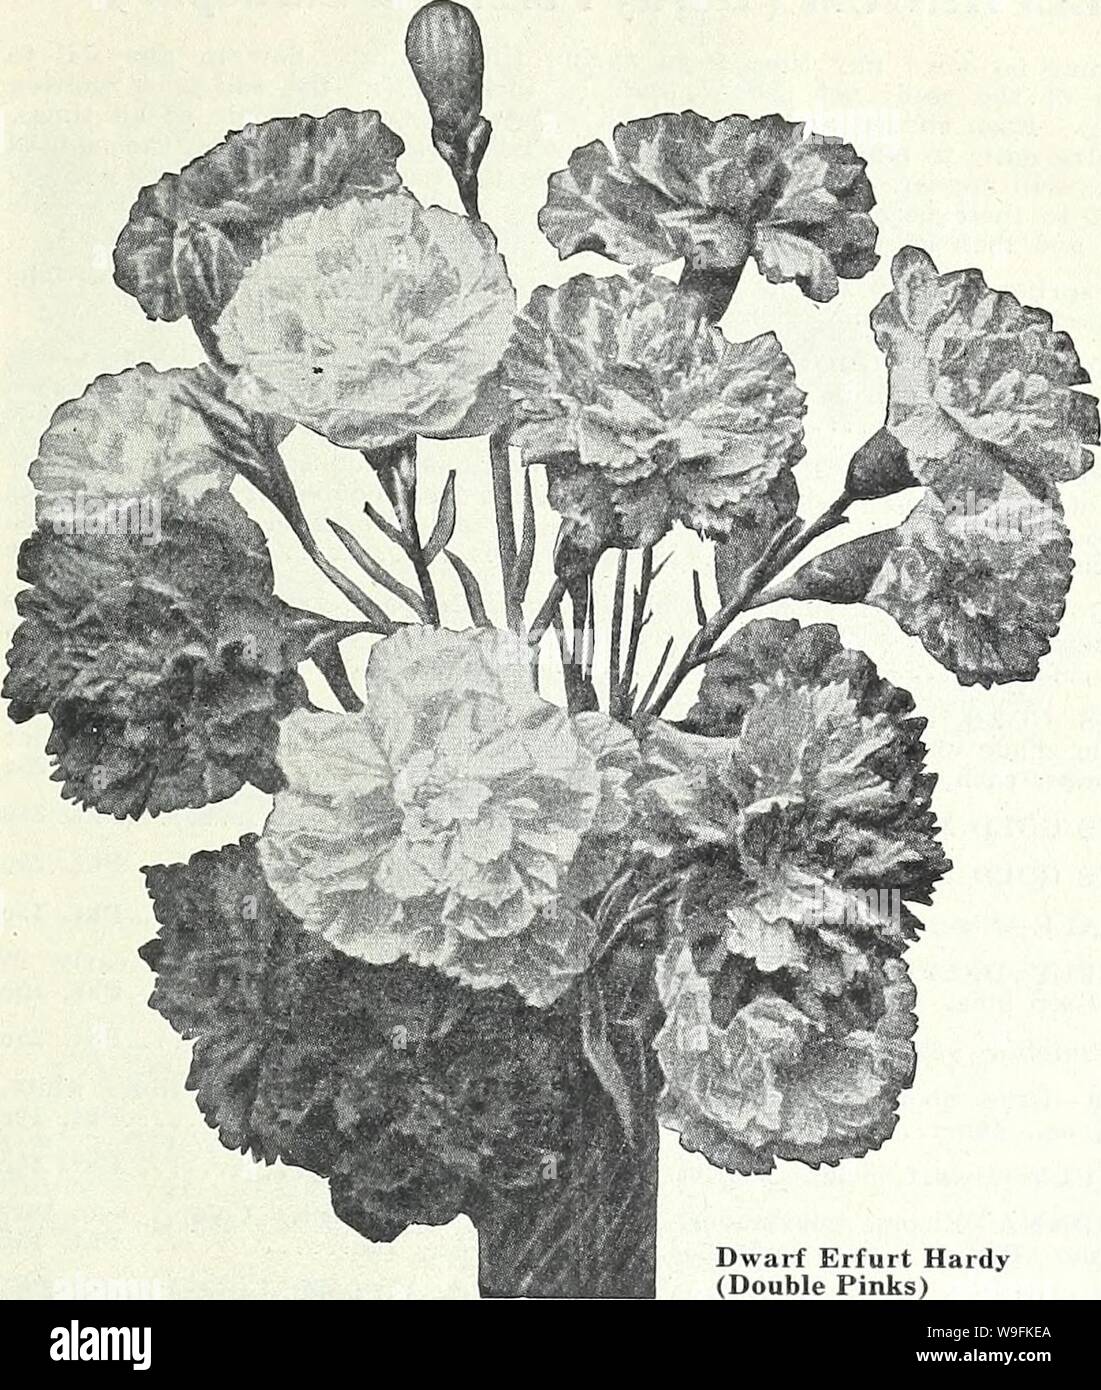 Archive image from page 50 of Currie's garden annual  spring. Currie's garden annual : spring 1934 59th year  curriesgardenann19curr 0 Year: 1934 ( CURRIE BROTHERS CO., MILWAUKEE. WIS Page 47    DIANTHUS GARDEN PINKS These low growing early flowering hardy pinks are especially desirable for the edges of herbaceous borders, where they can remain undisturbed for many years. The flowers have a de- licious, spicy fragrance, fine for cutting. CAESIUS (Cheddar Pink)—Forms compact cushions of glaucous leaves and sweet-scented, rose-pink flowers in May and June; hne for the rock garden. Plants, price, Stock Photo